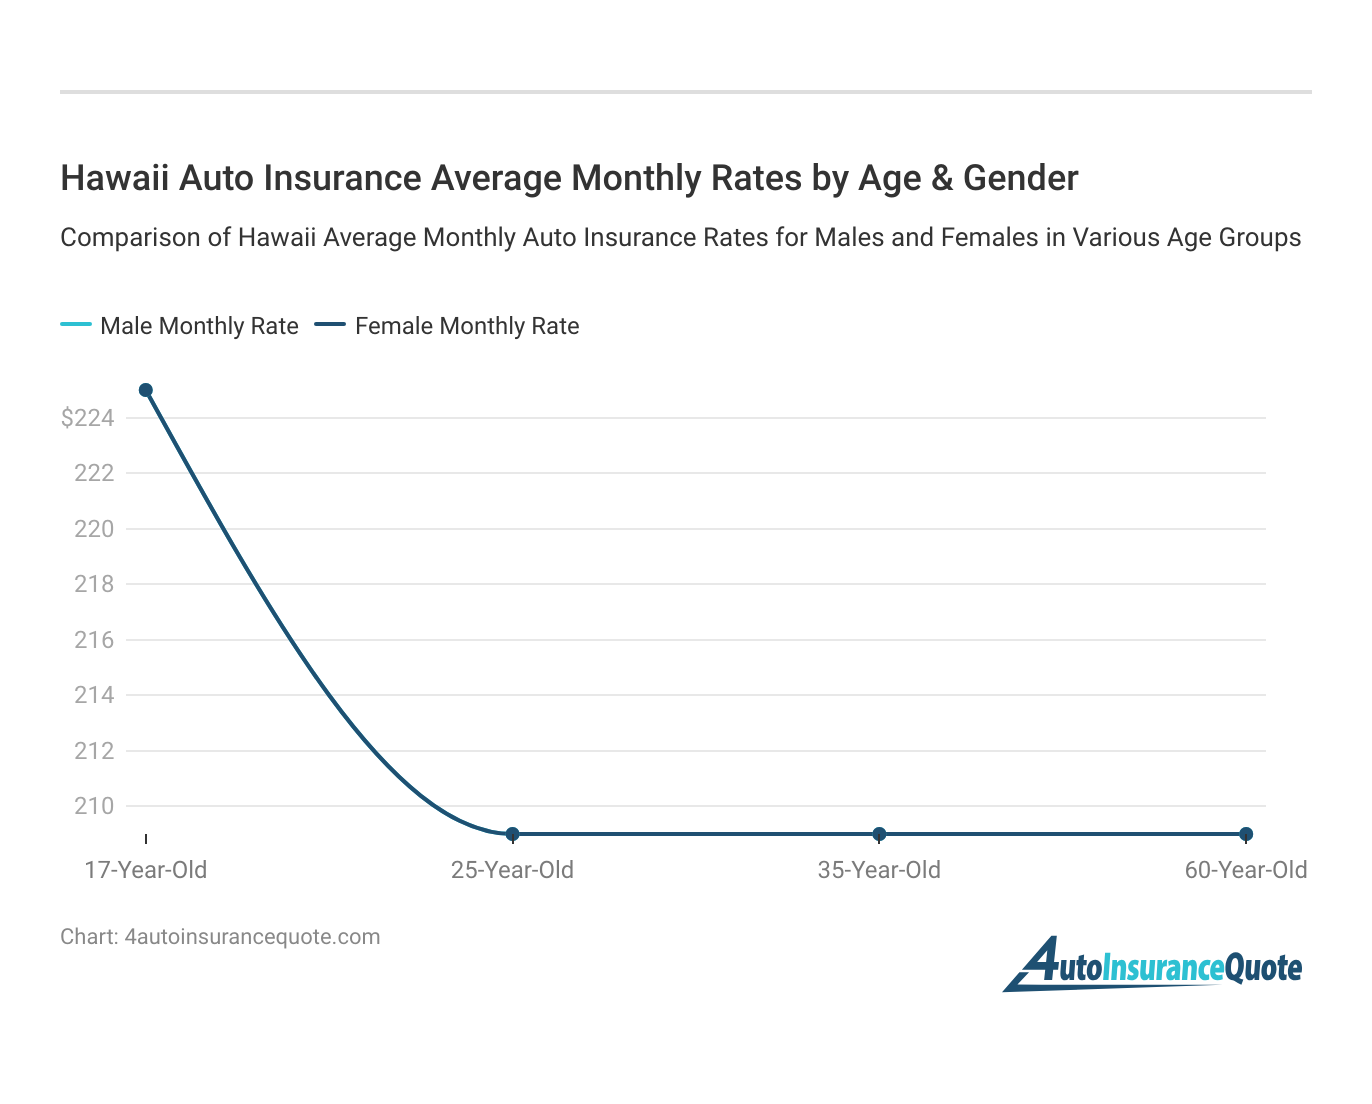 <h3>Hawaii Auto Insurance Average Monthly Rates by Age & Gender</h3>